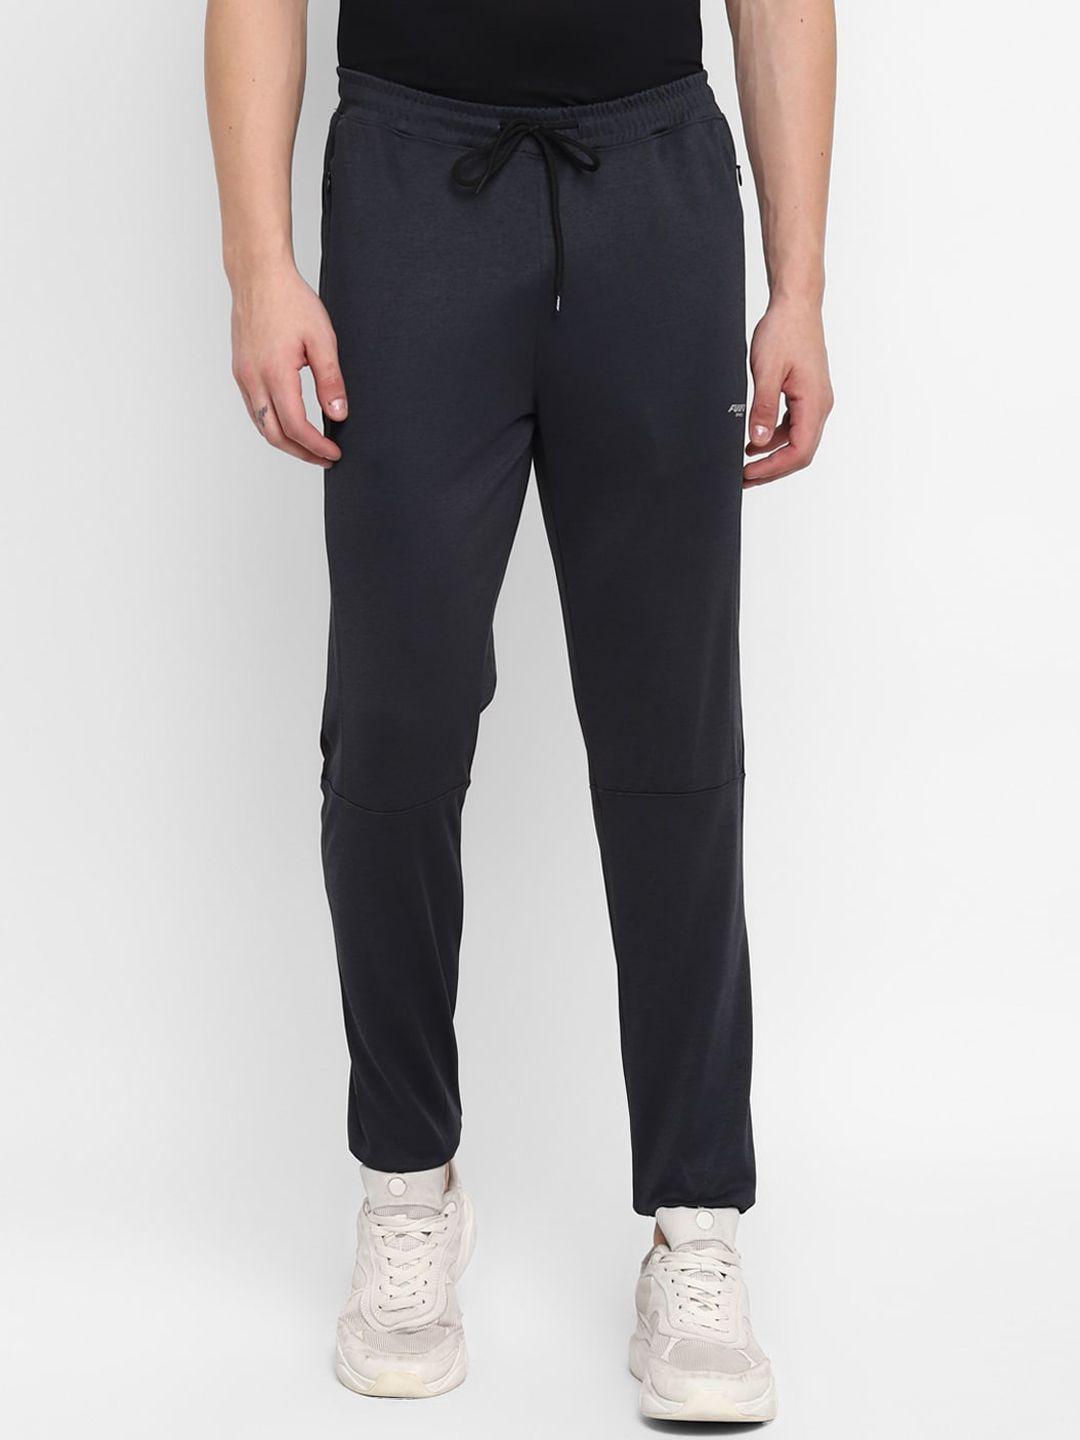 furo-by-red-chief-men-grey-solid-sports-joggers